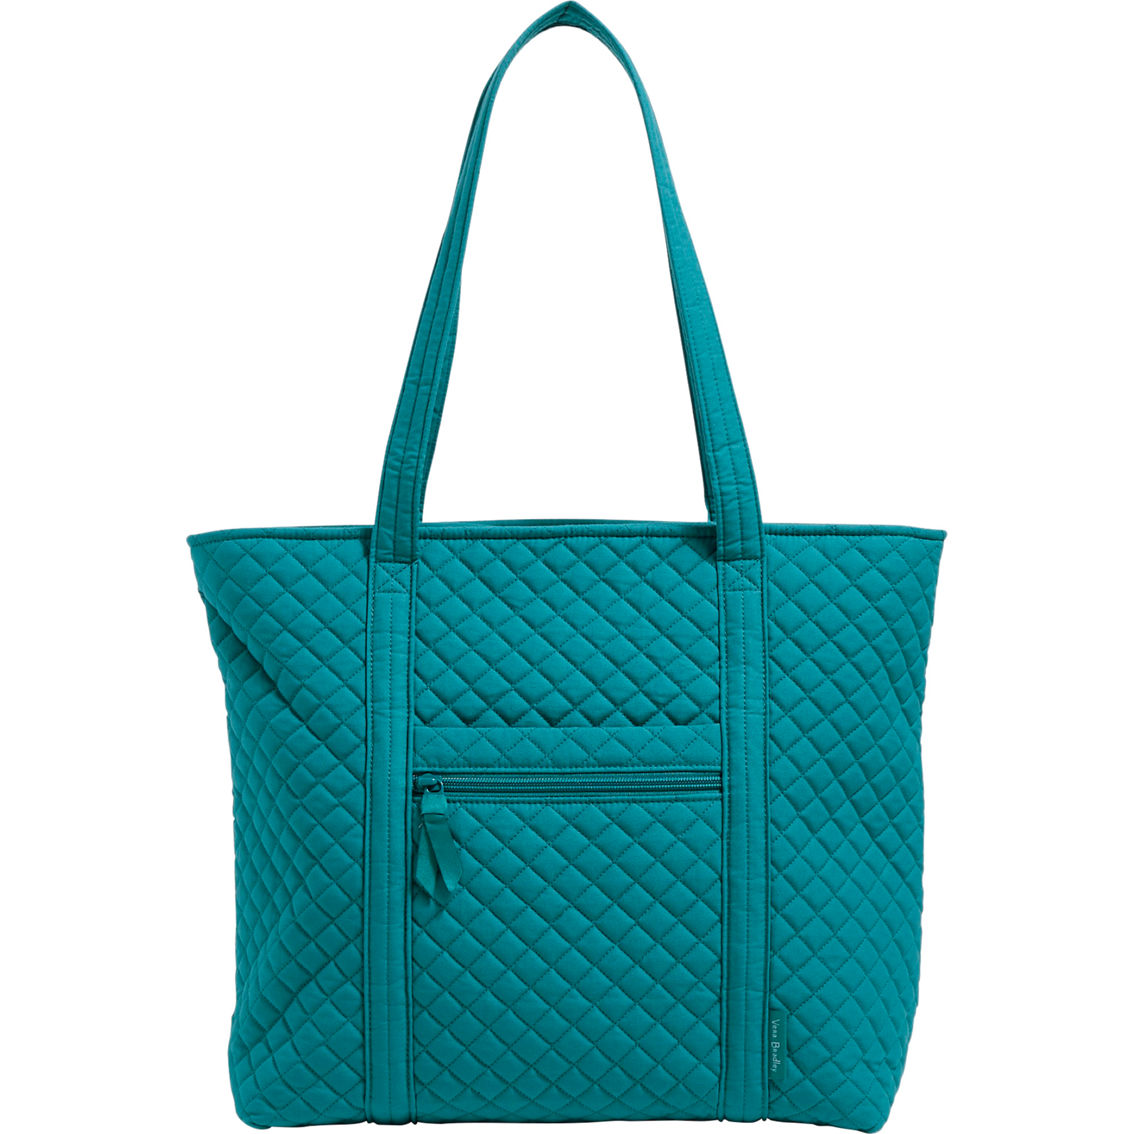 Vera Bradley Forever Green Vera Tote Bag | Totes & Shoppers | Clothing ...